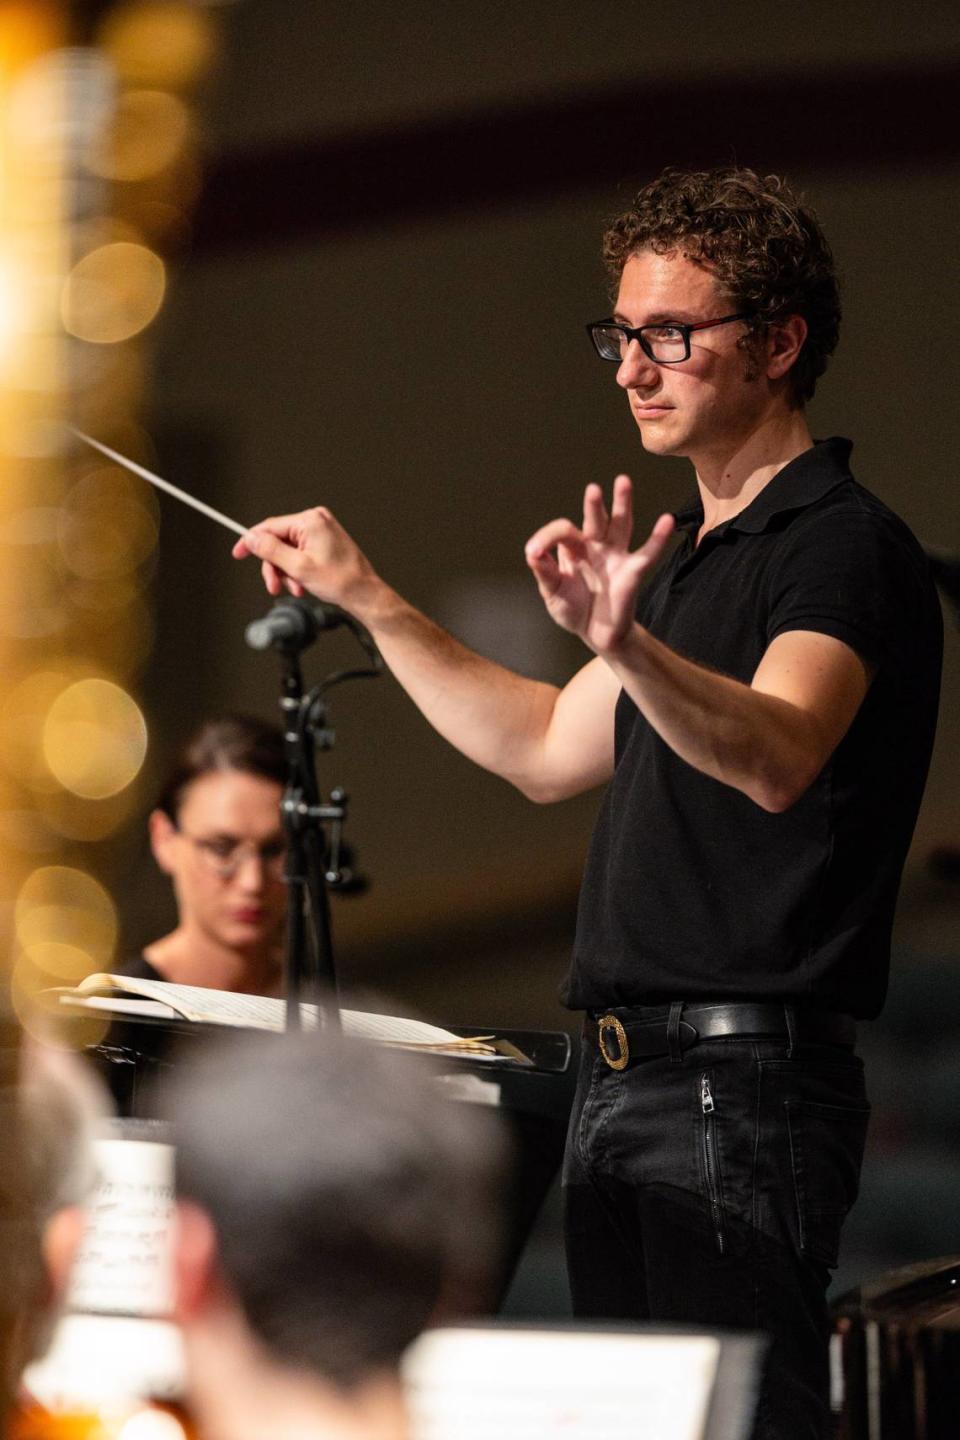 Louisville Orchestra conductor Teddy Abrams at a performance in Somerset. The orchestra has been on a two-year tour of Kentucky cities. Stevens Media Services